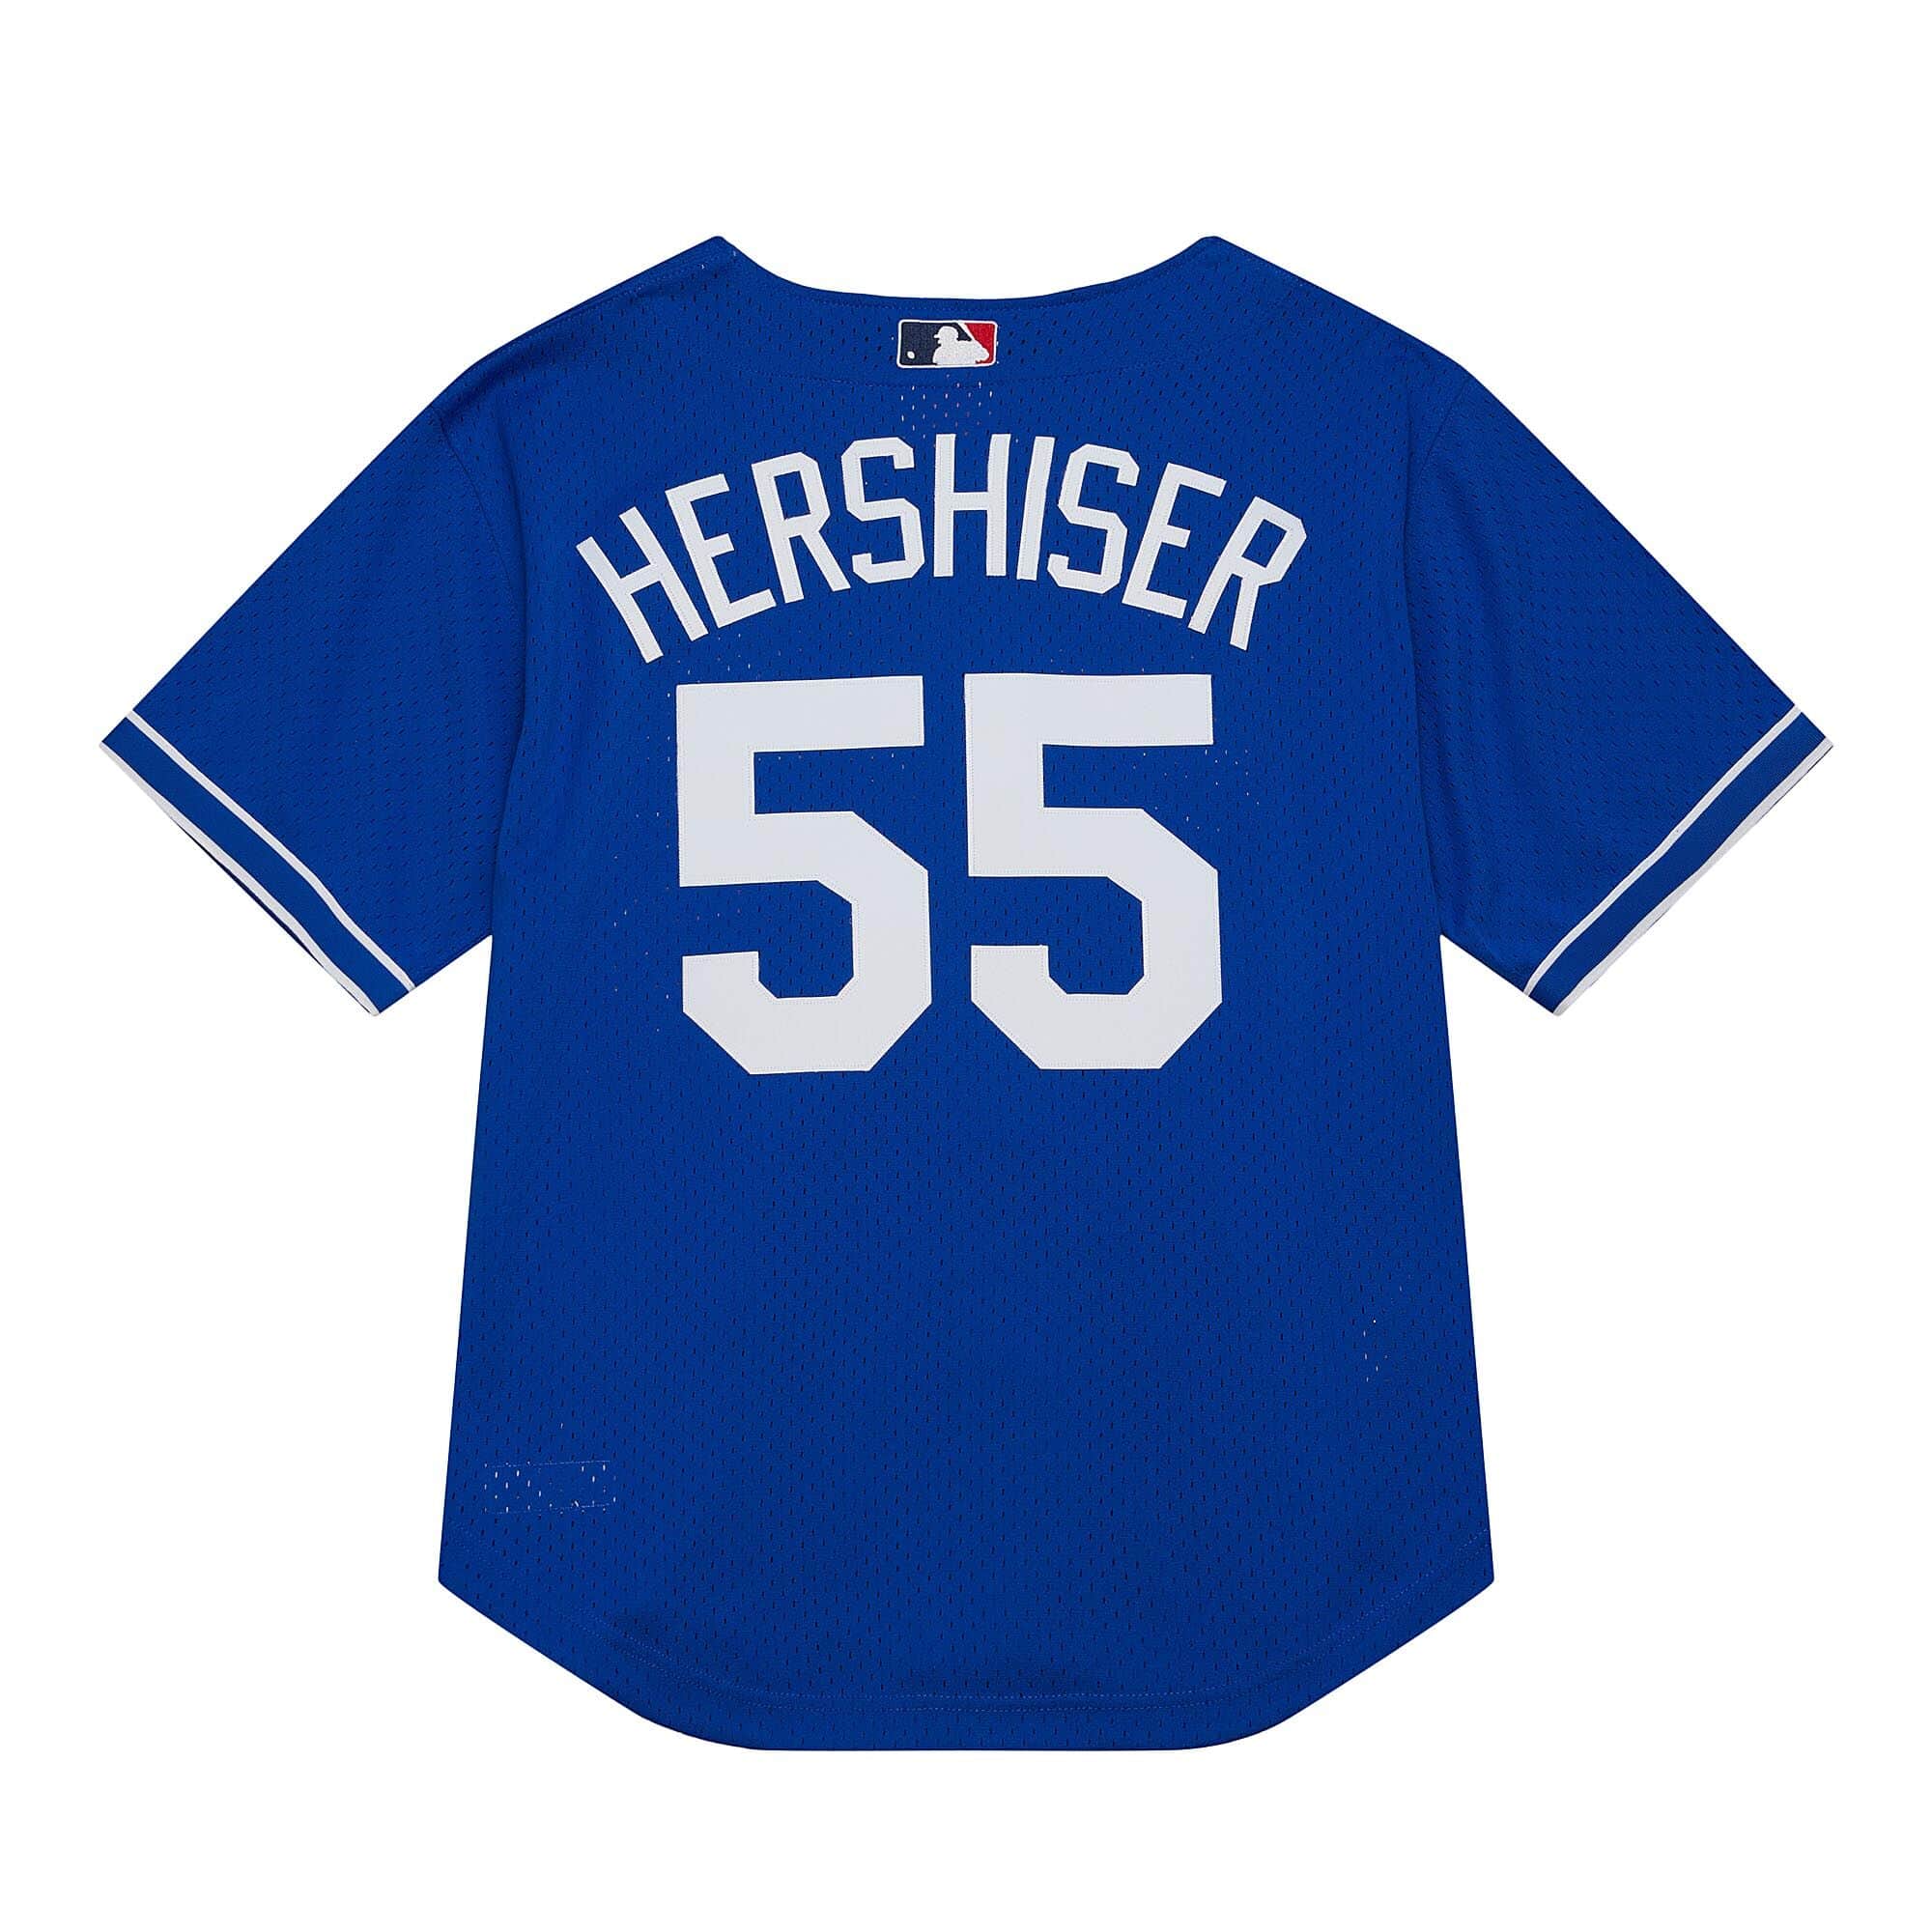 Maillot Mlb Dodgers OHershis